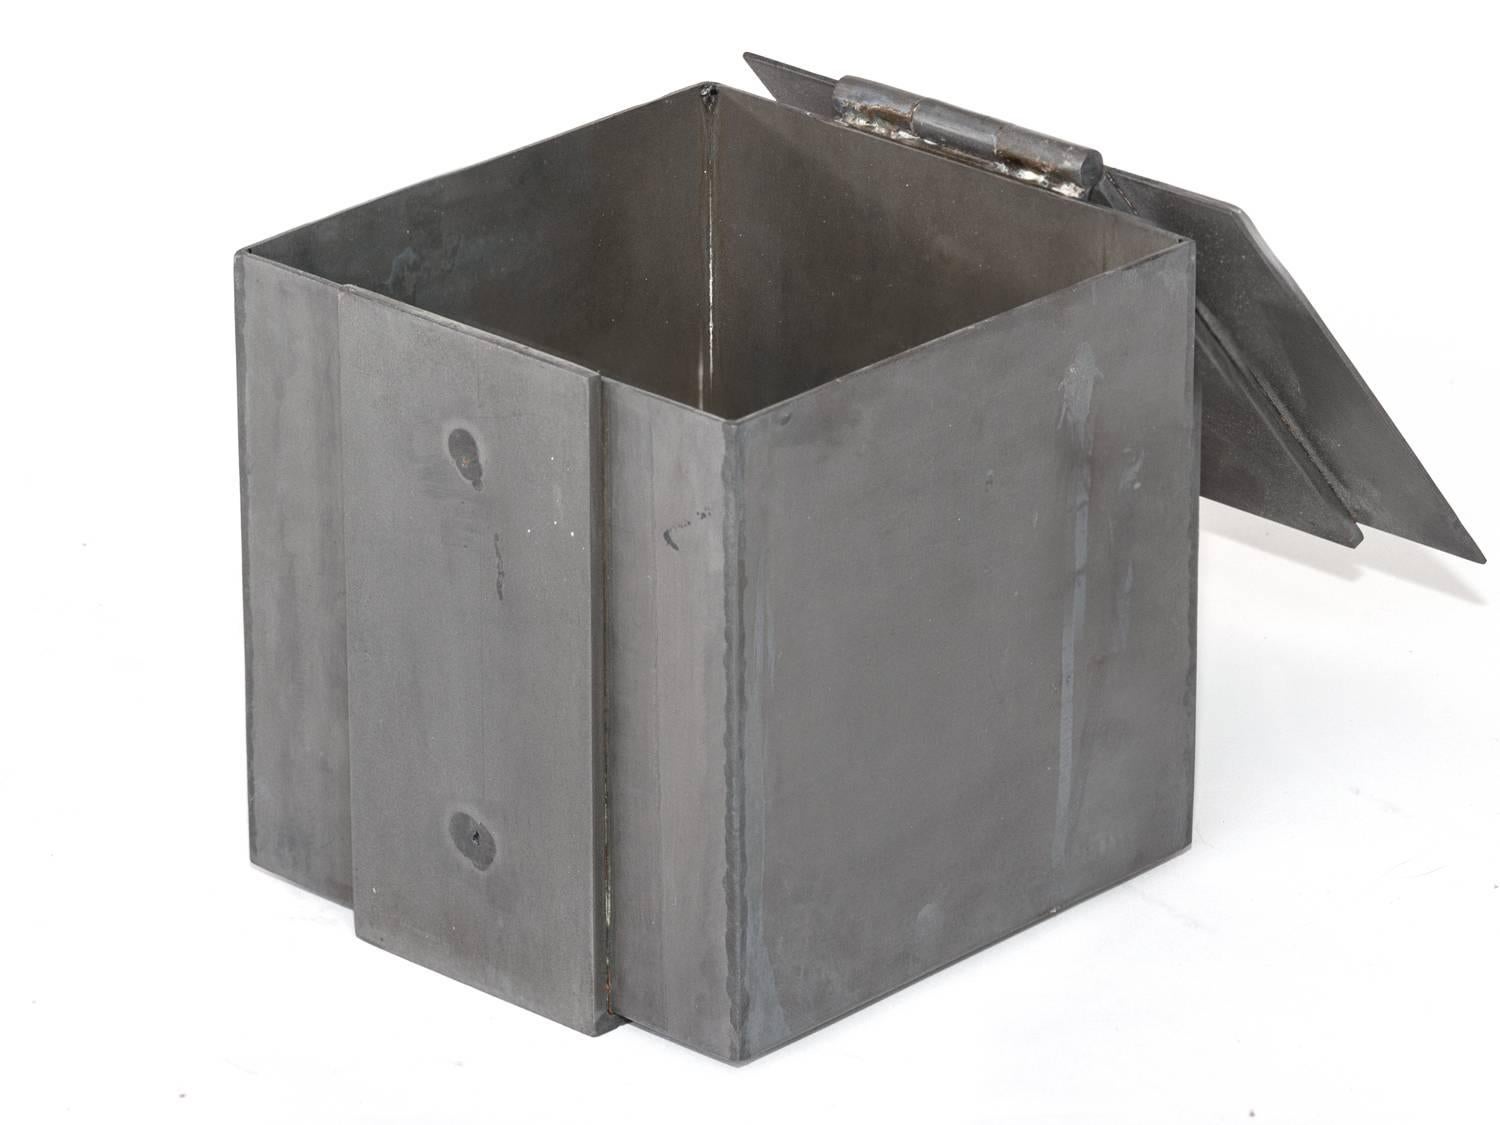 Large patinated iron box by P4H (Parts of Four Home) available from LMD/studio. 

P4H (Parts of Four Home) is a collaborative label developed by Lukas Machnik and Evan Sugerman. 

Due to the acid-wash patina, each item has a unique